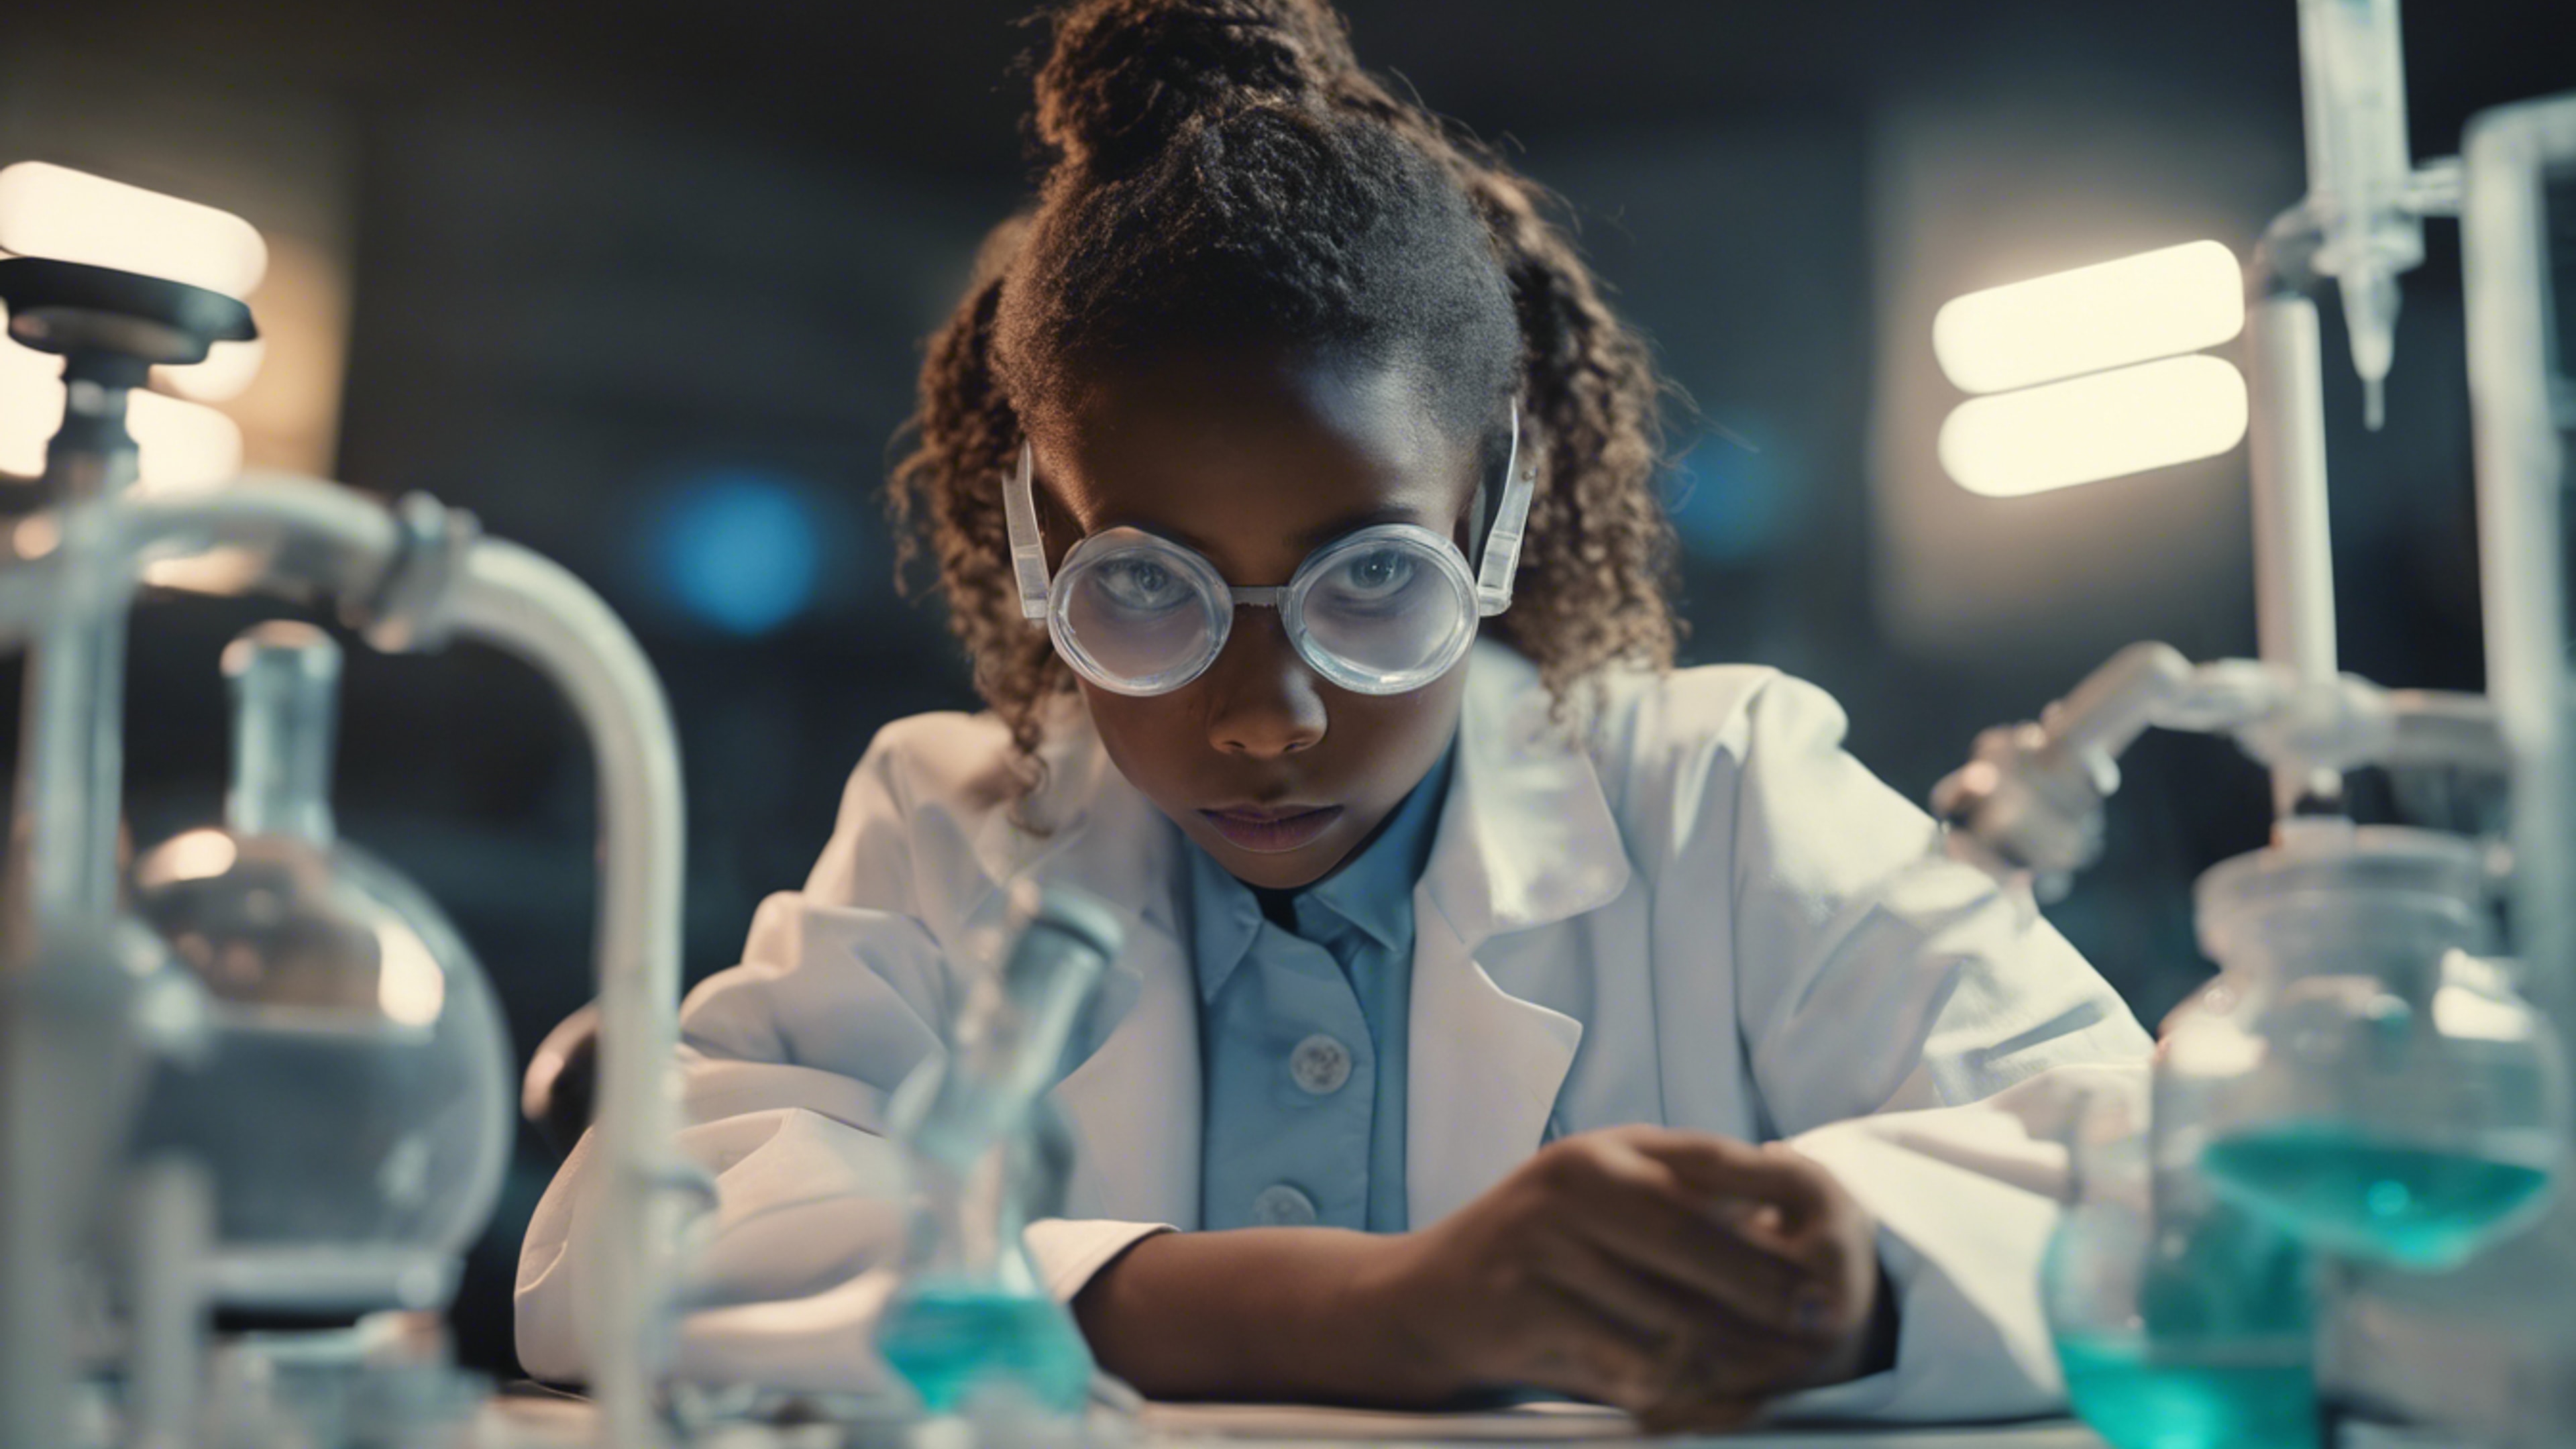 A young black girl wearing goggles and lab coat immersed in doing science experiment. ورق الجدران[448c919503a247f79693]